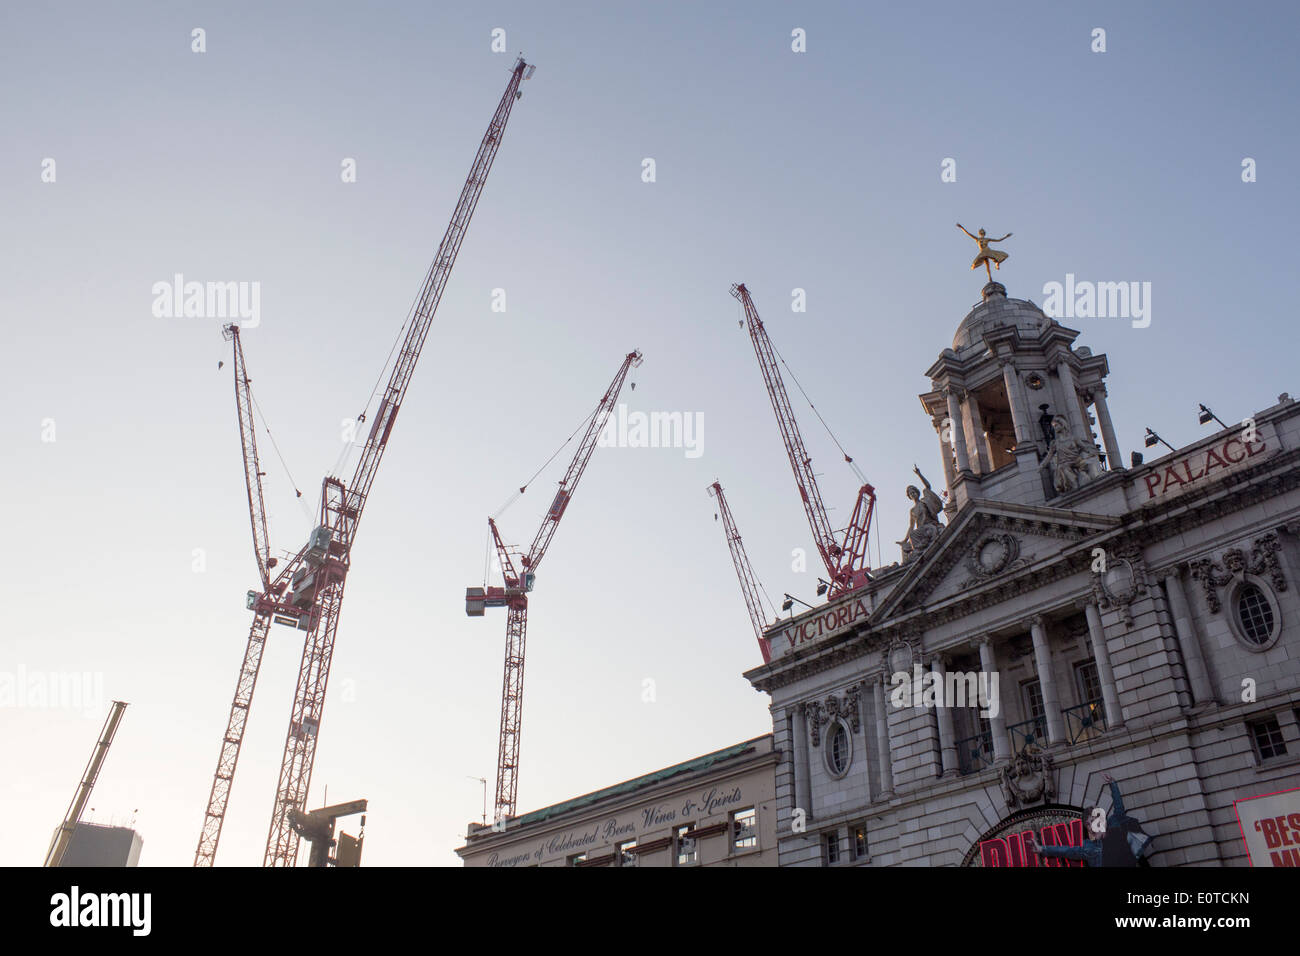 Cranes at construction site building site next to Victoria Palace Theatre central London England UK Stock Photo